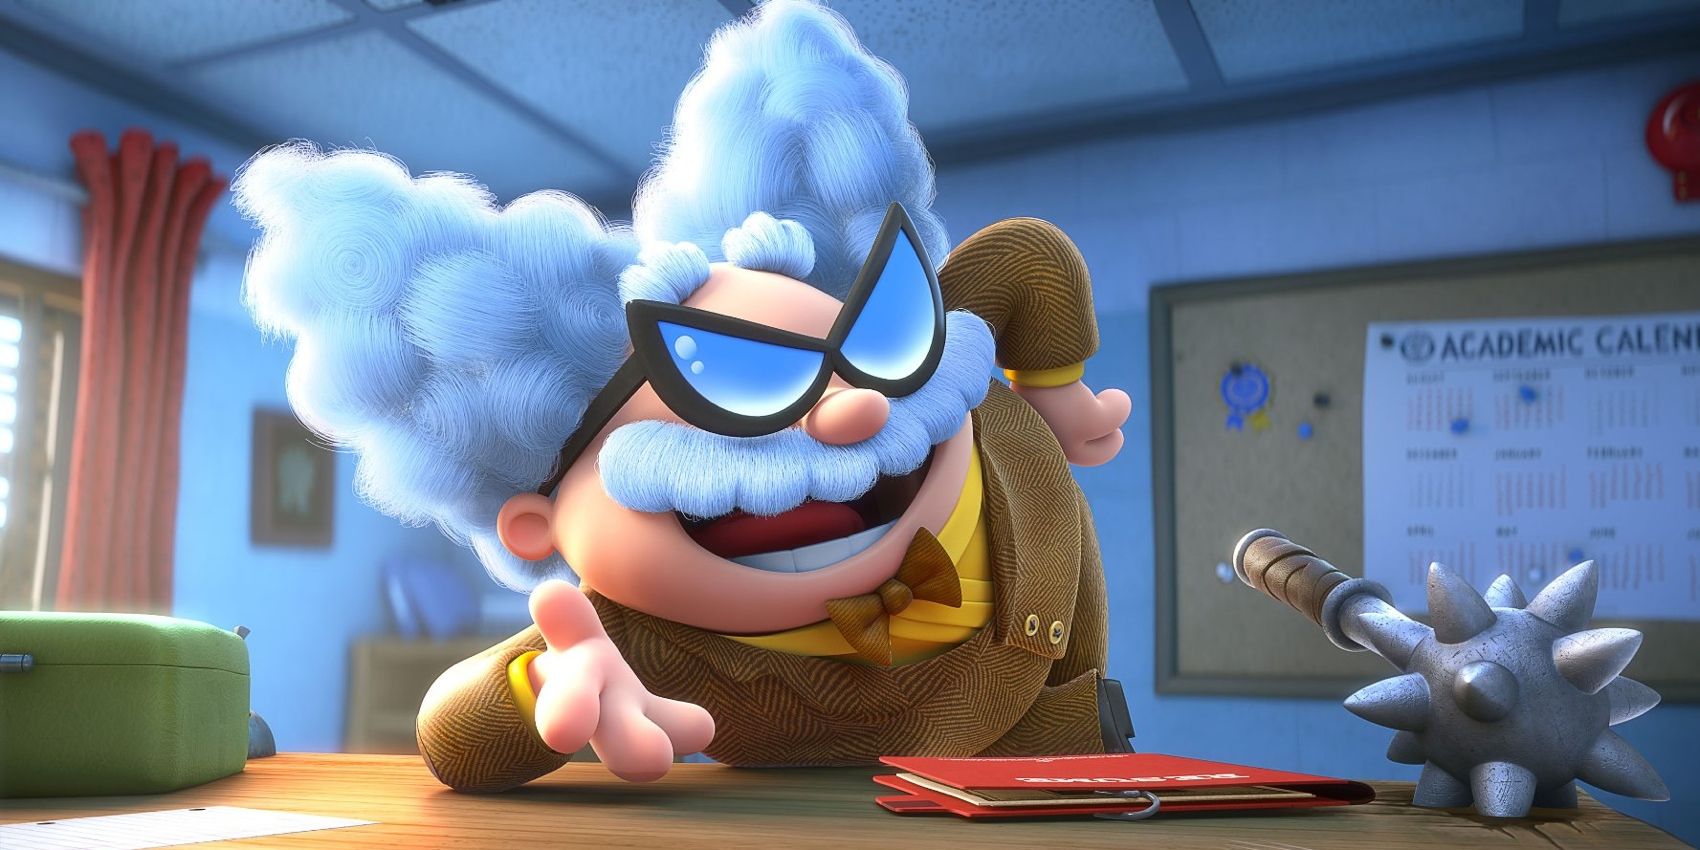 Professor Poopypants leaning over a desk in Captain Underpants.